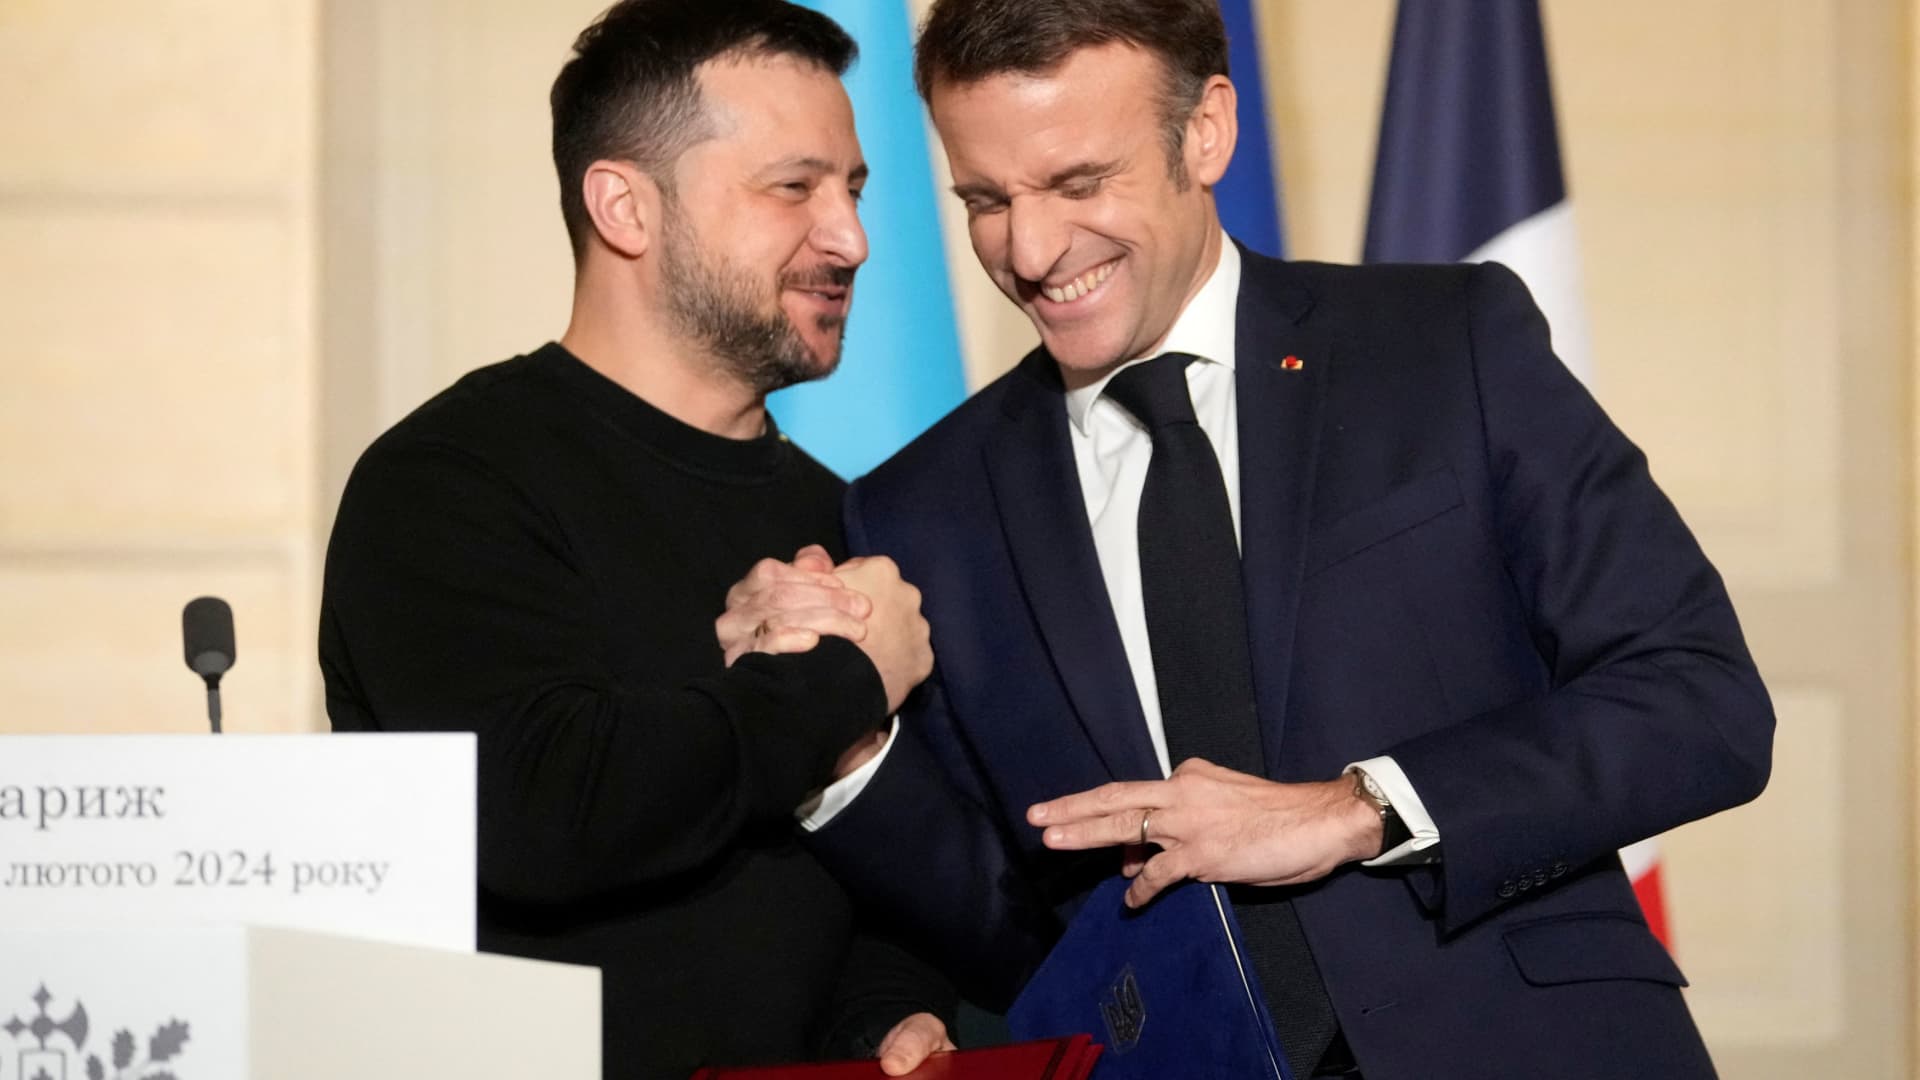 French President Emmanuel Macron and his Ukrainian counterpart Volodymyr Zelenskyy react after signing an agreement, February 16, 2024 at the Elysee Palace in Paris, France. 